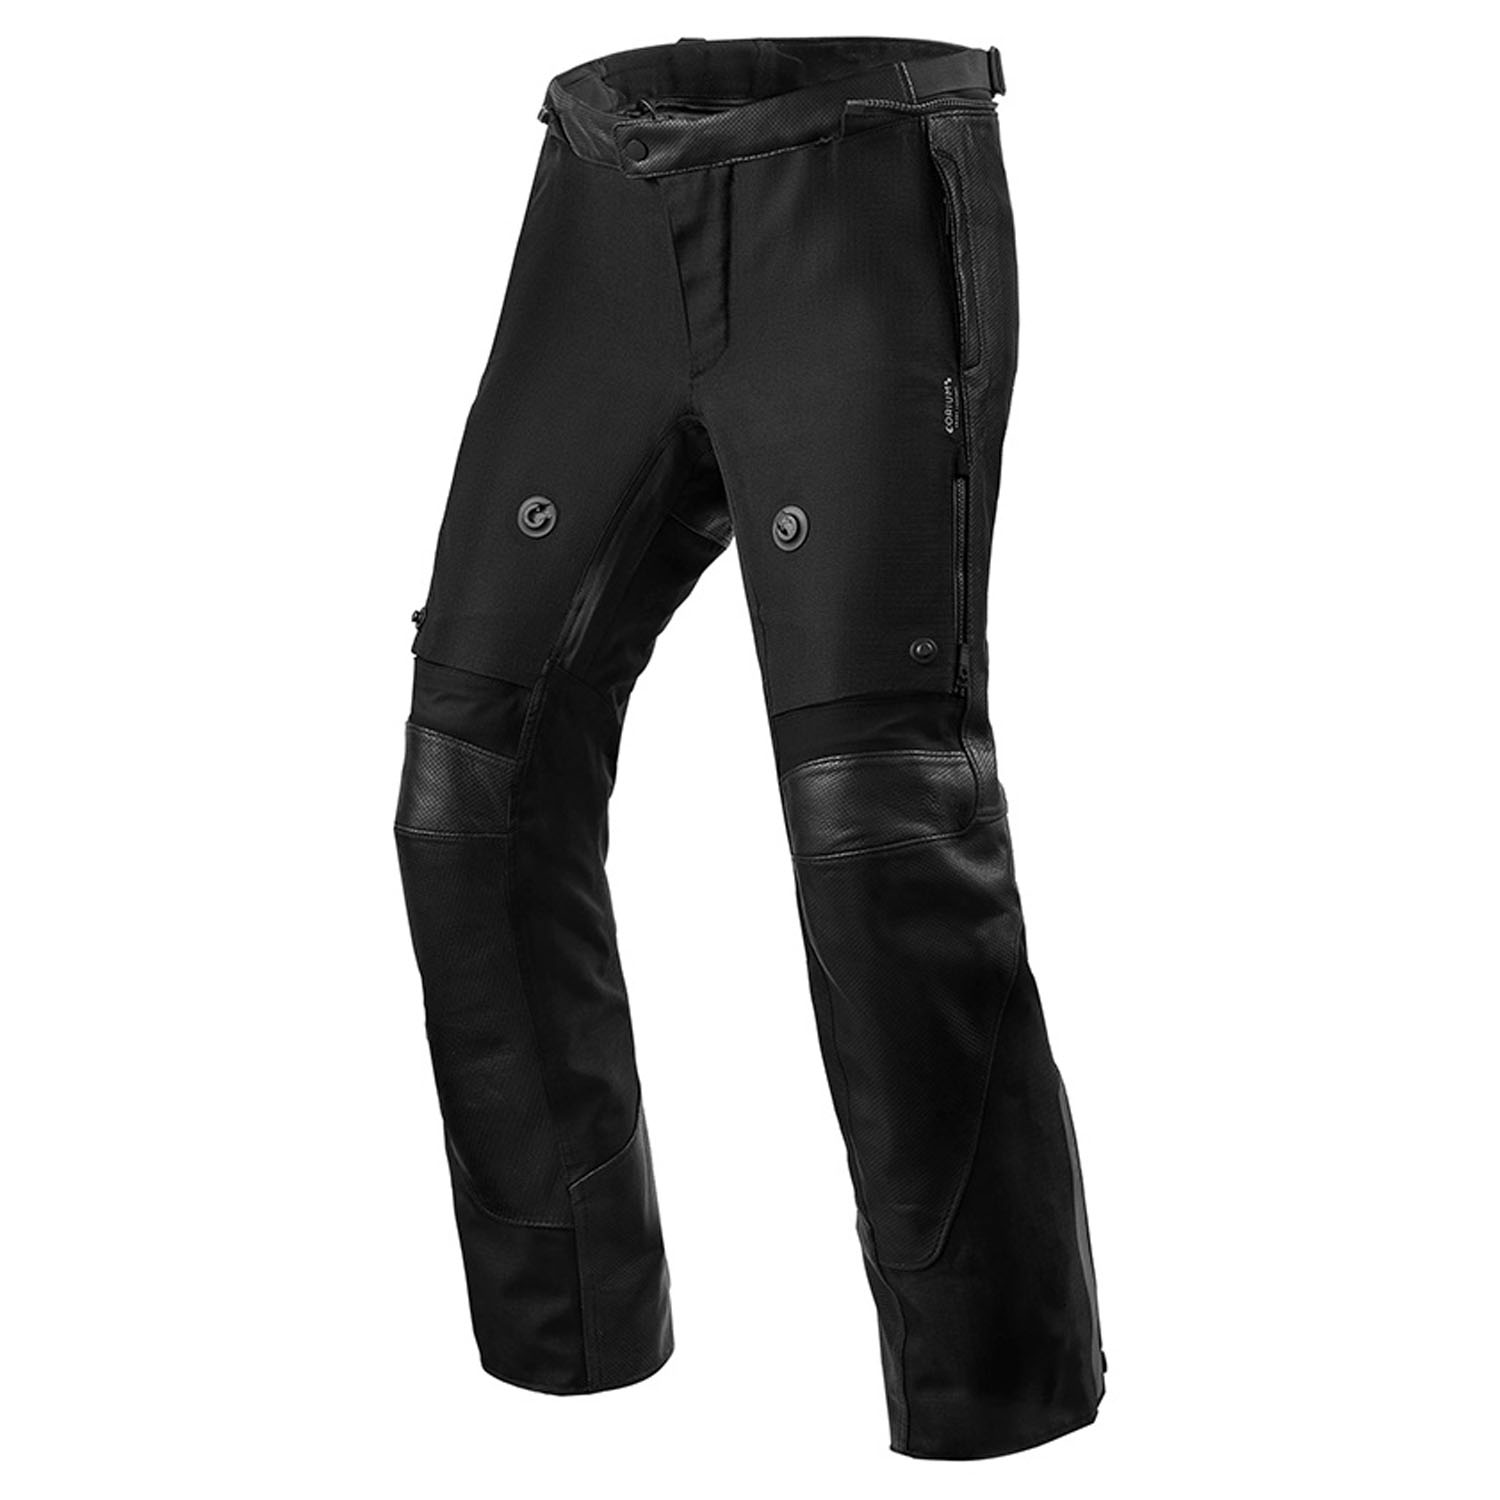 Image of REV'IT! Trousers Valve H2O Black Long Motorcycle Pants Size 54 ID 8700001315920